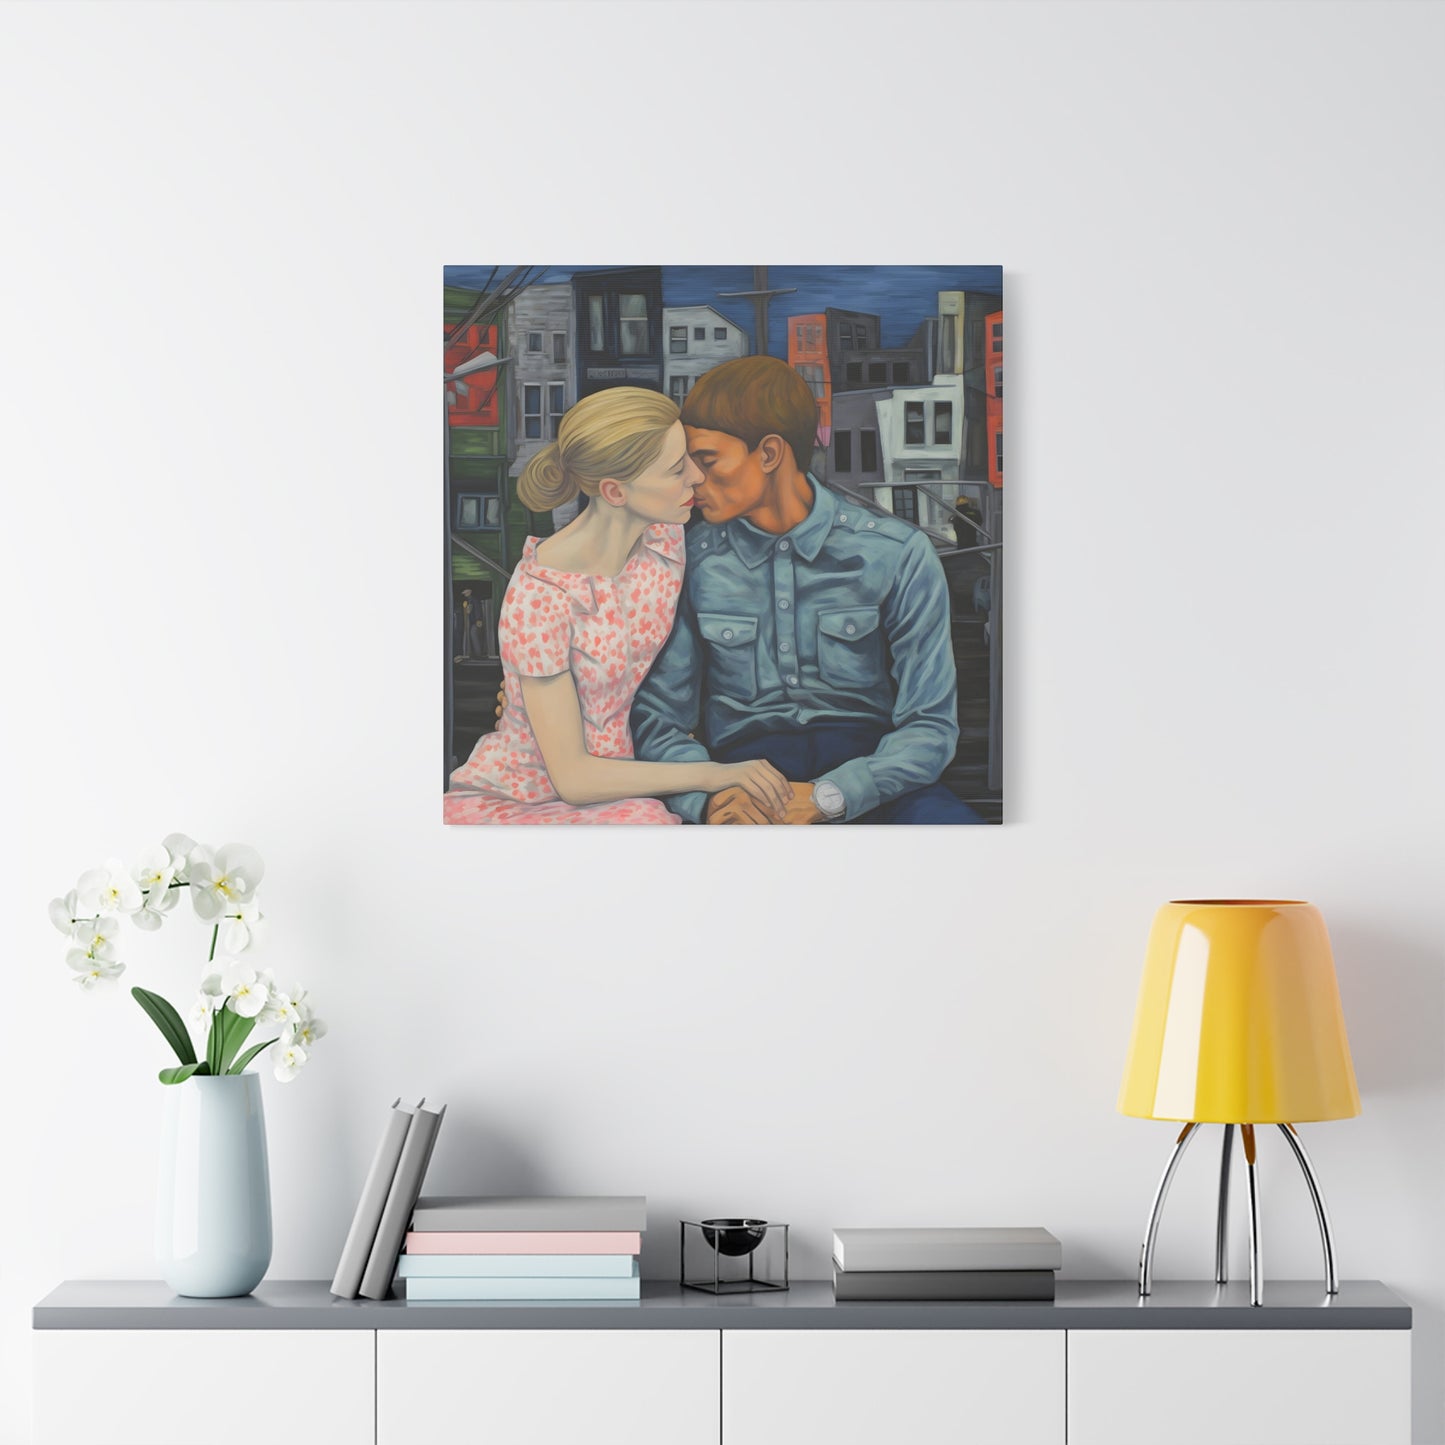 Luther Rosco. The Embrace on Mulberry Street. Exclusive Canvas Print